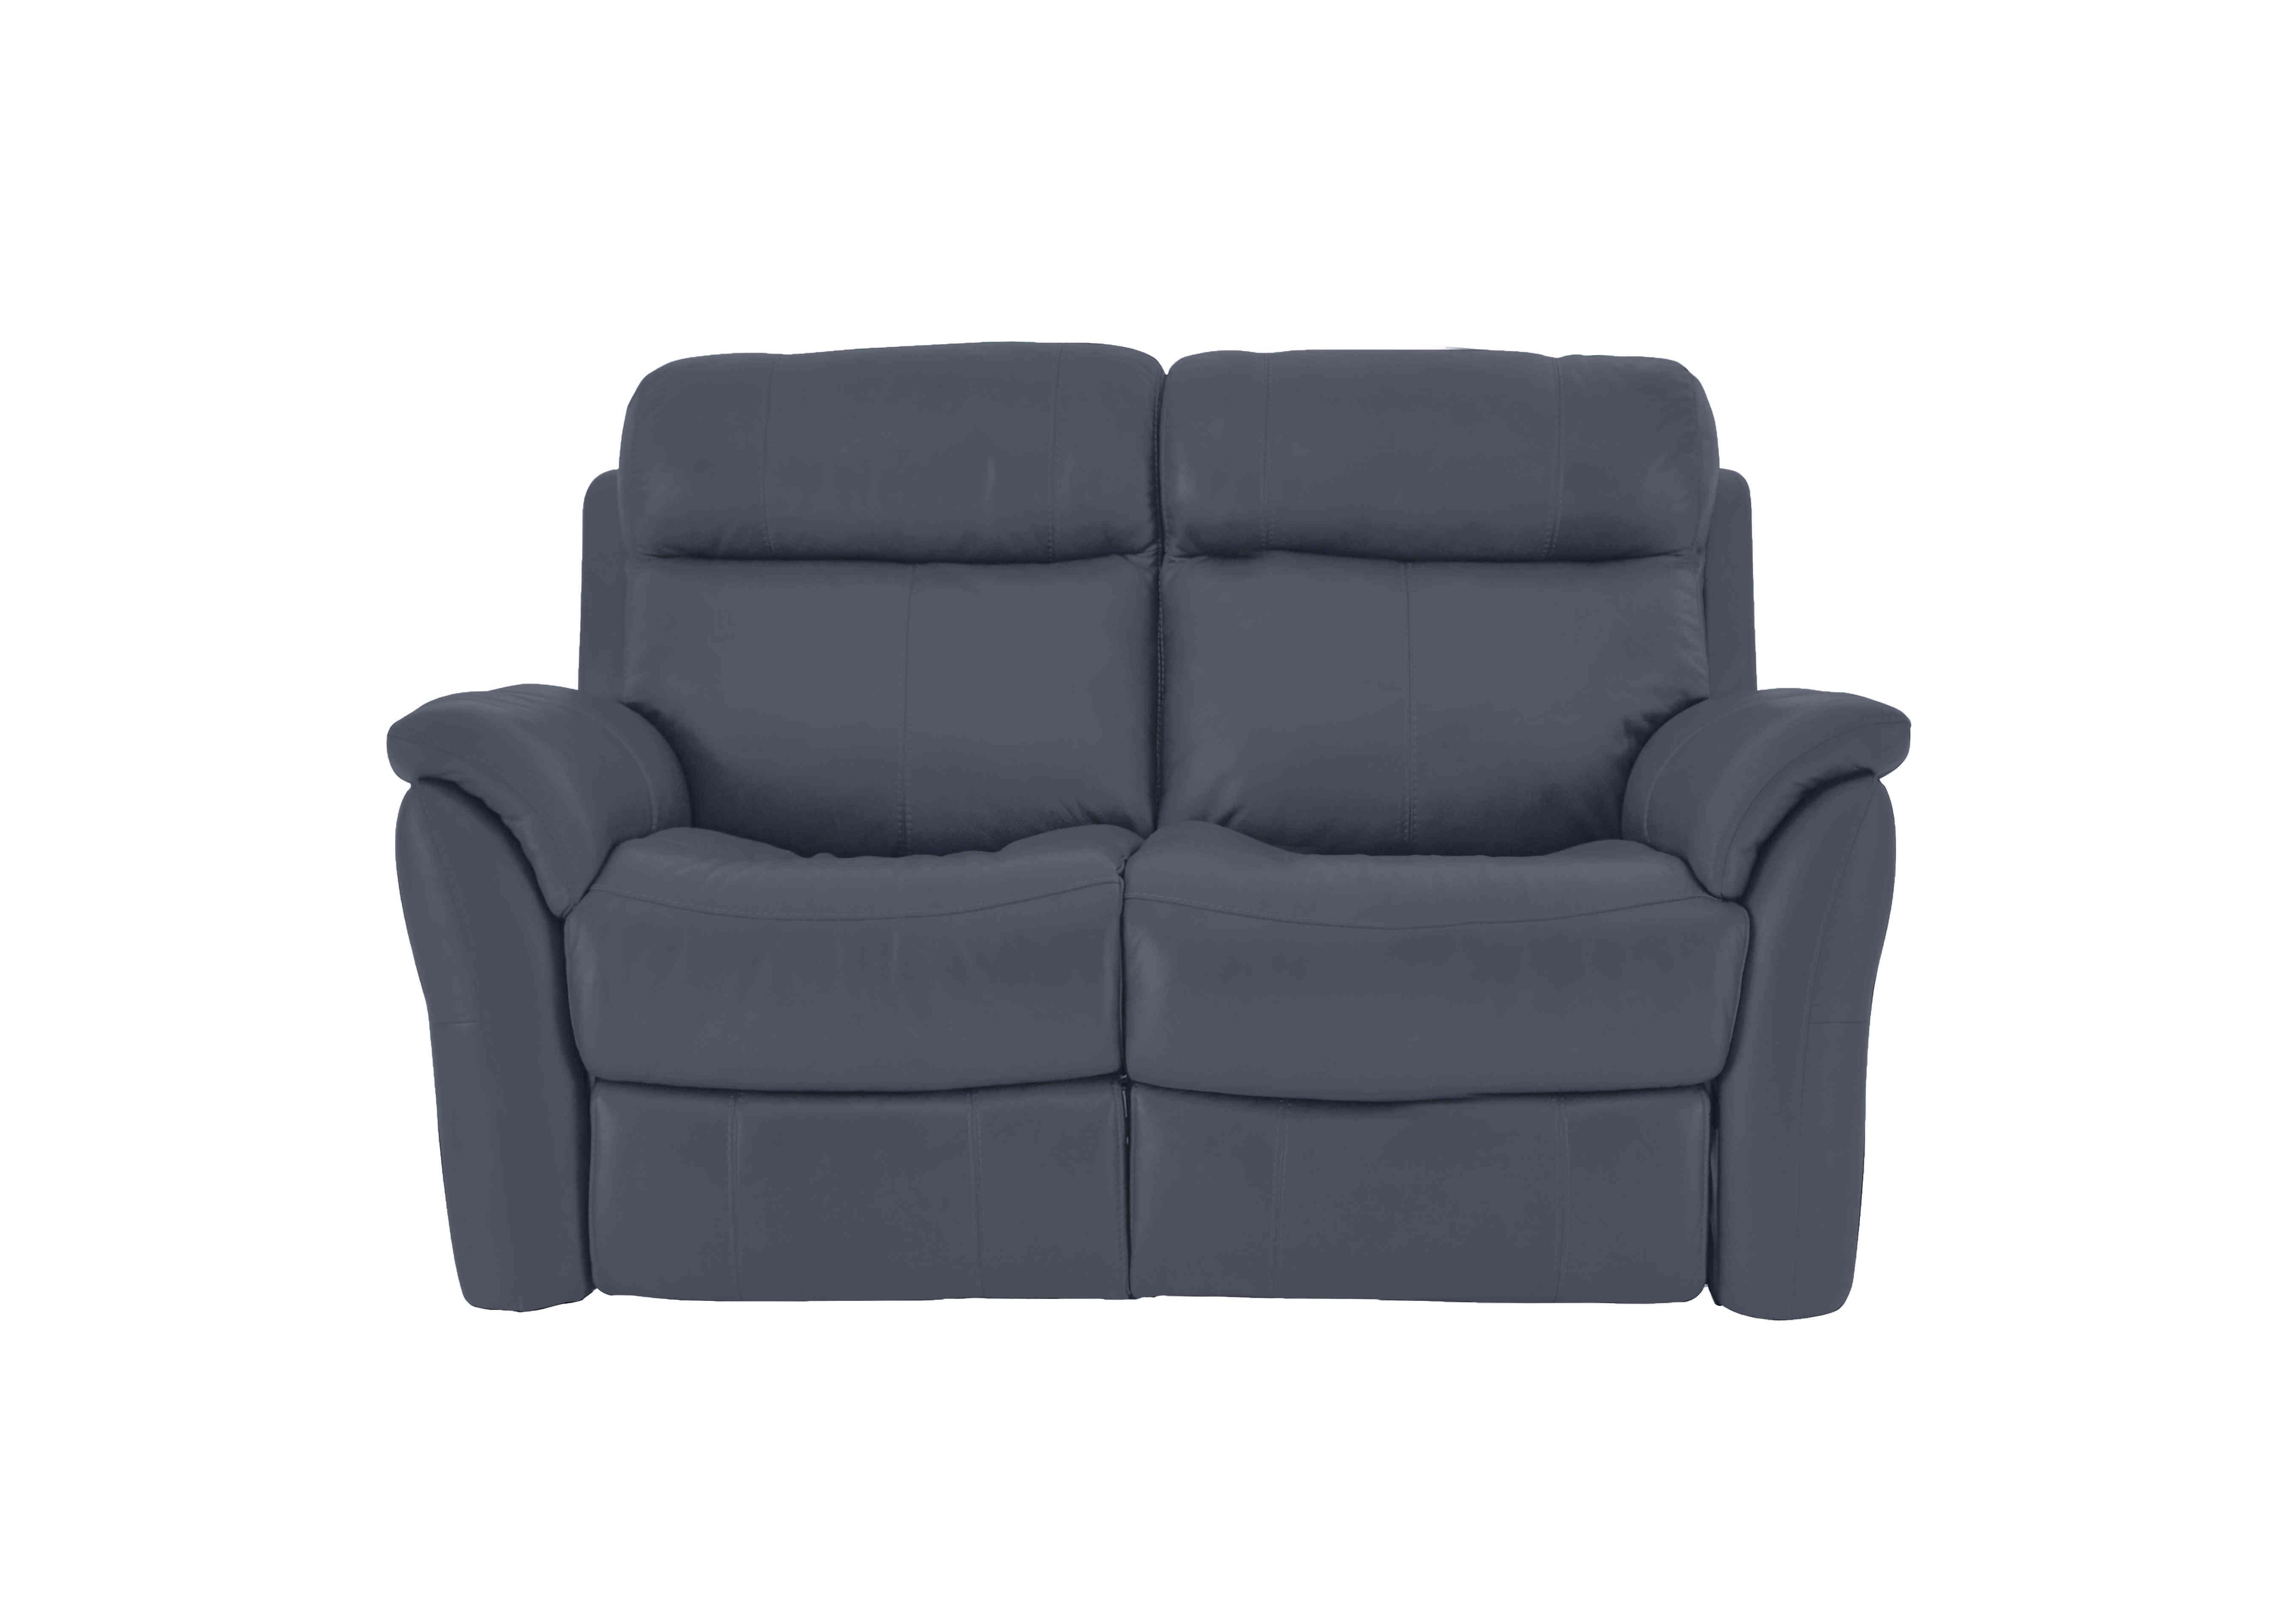 Relax Station Revive 2 Seater Leather Sofa in Bv-313e Ocean Blue on Furniture Village